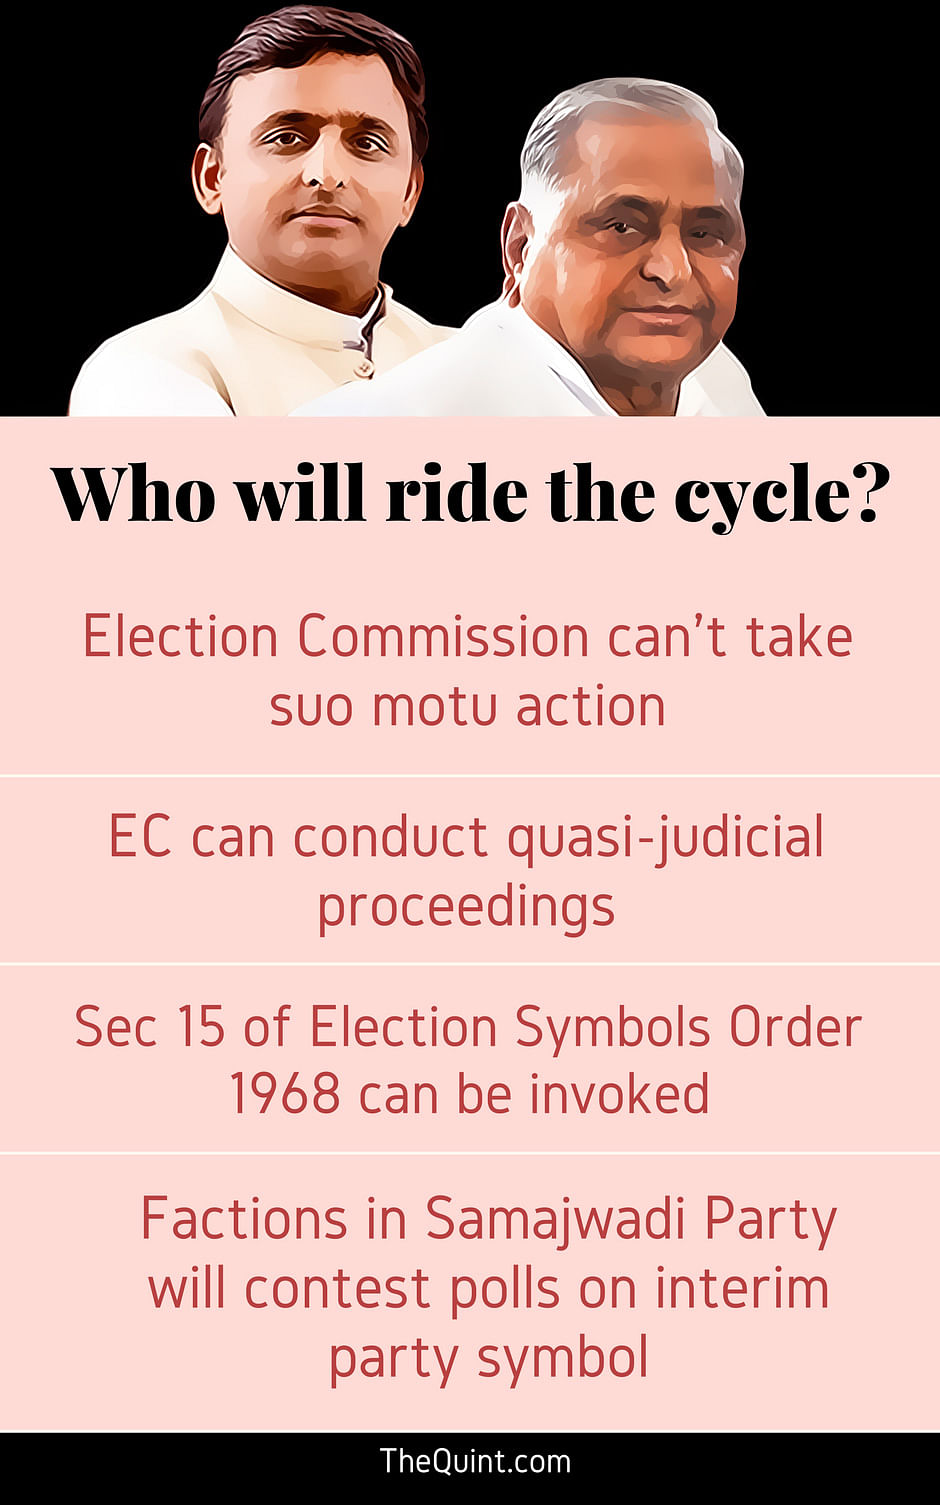 As the internal rift within SP widens, the EC may freeze the party’s cycle symbol, writes SY Quraishi.